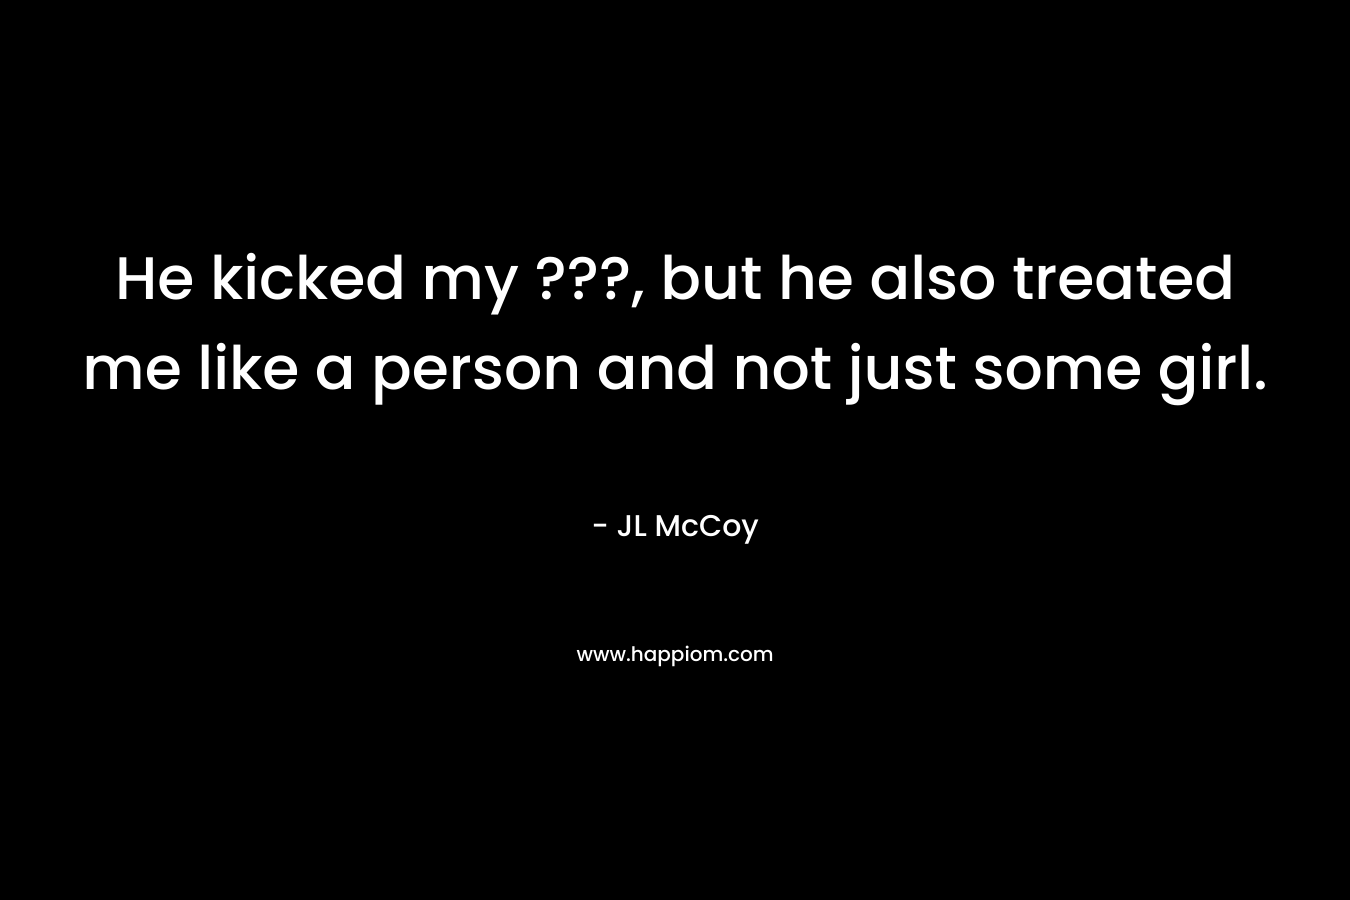 He kicked my ???, but he also treated me like a person and not just some girl. – JL McCoy